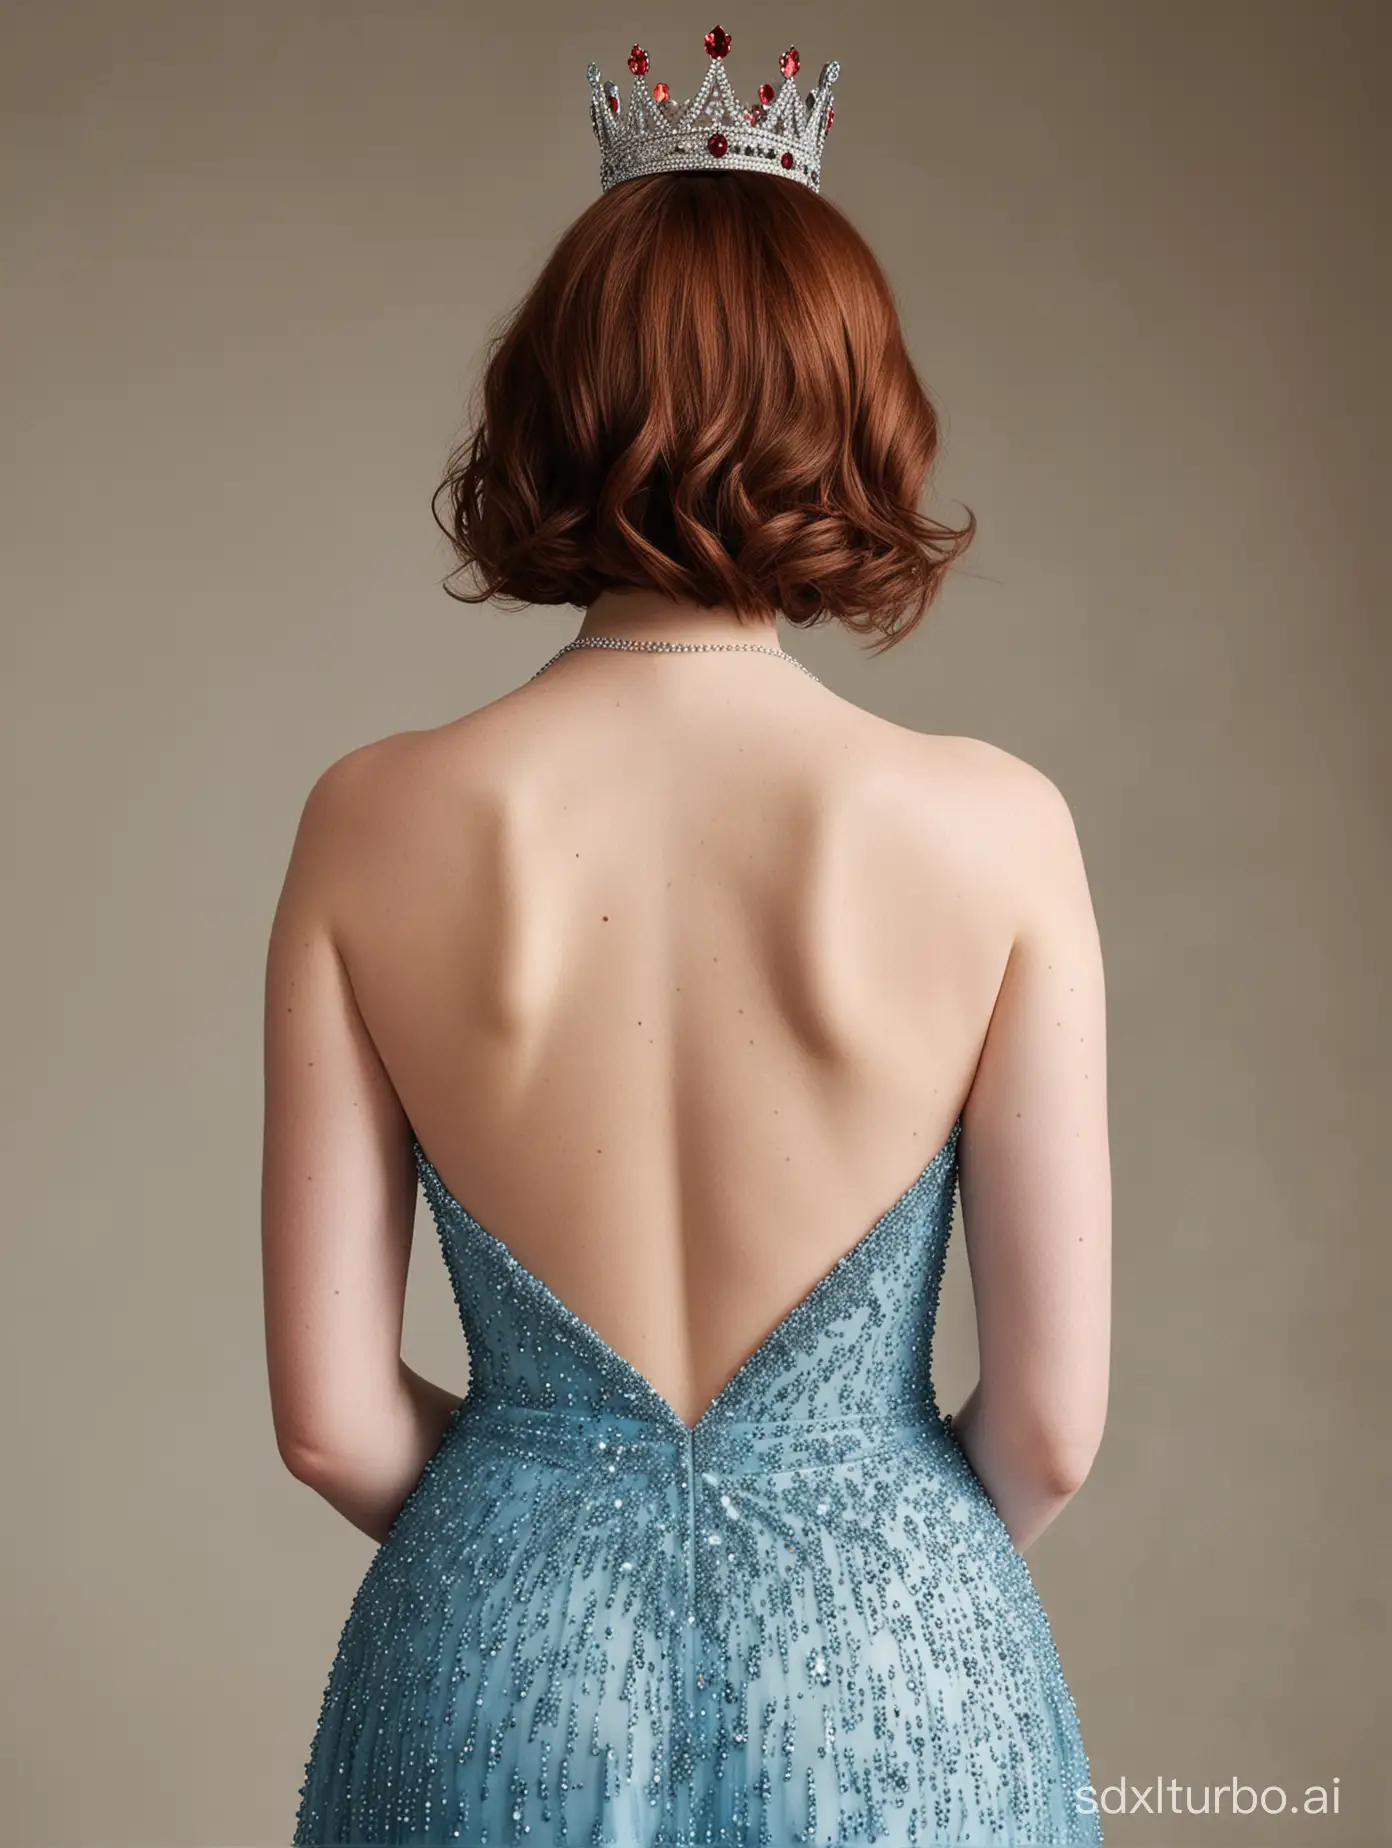 Emma Stone，plump，((full body,back view))，naked，huge breast, red lips，blue eyes，focus on eyes，upper body，with a red Diamond crown on her head and a blue dress on her body，back view， by Jessica Durrant